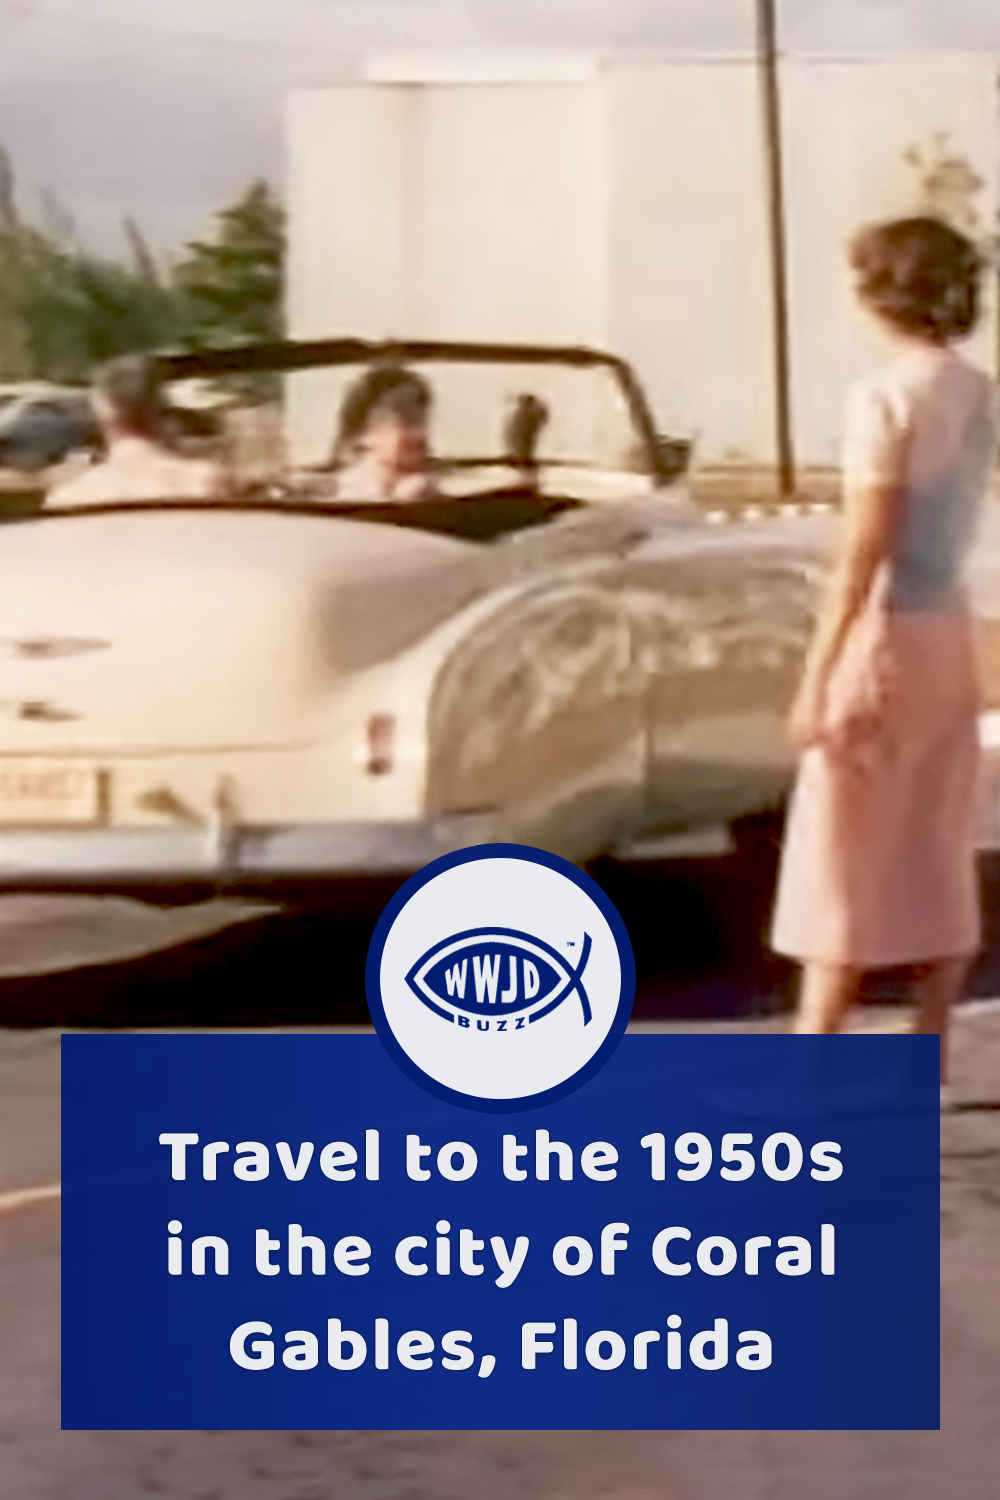 Travel to the 1950s in the city of Coral Gables, Florida